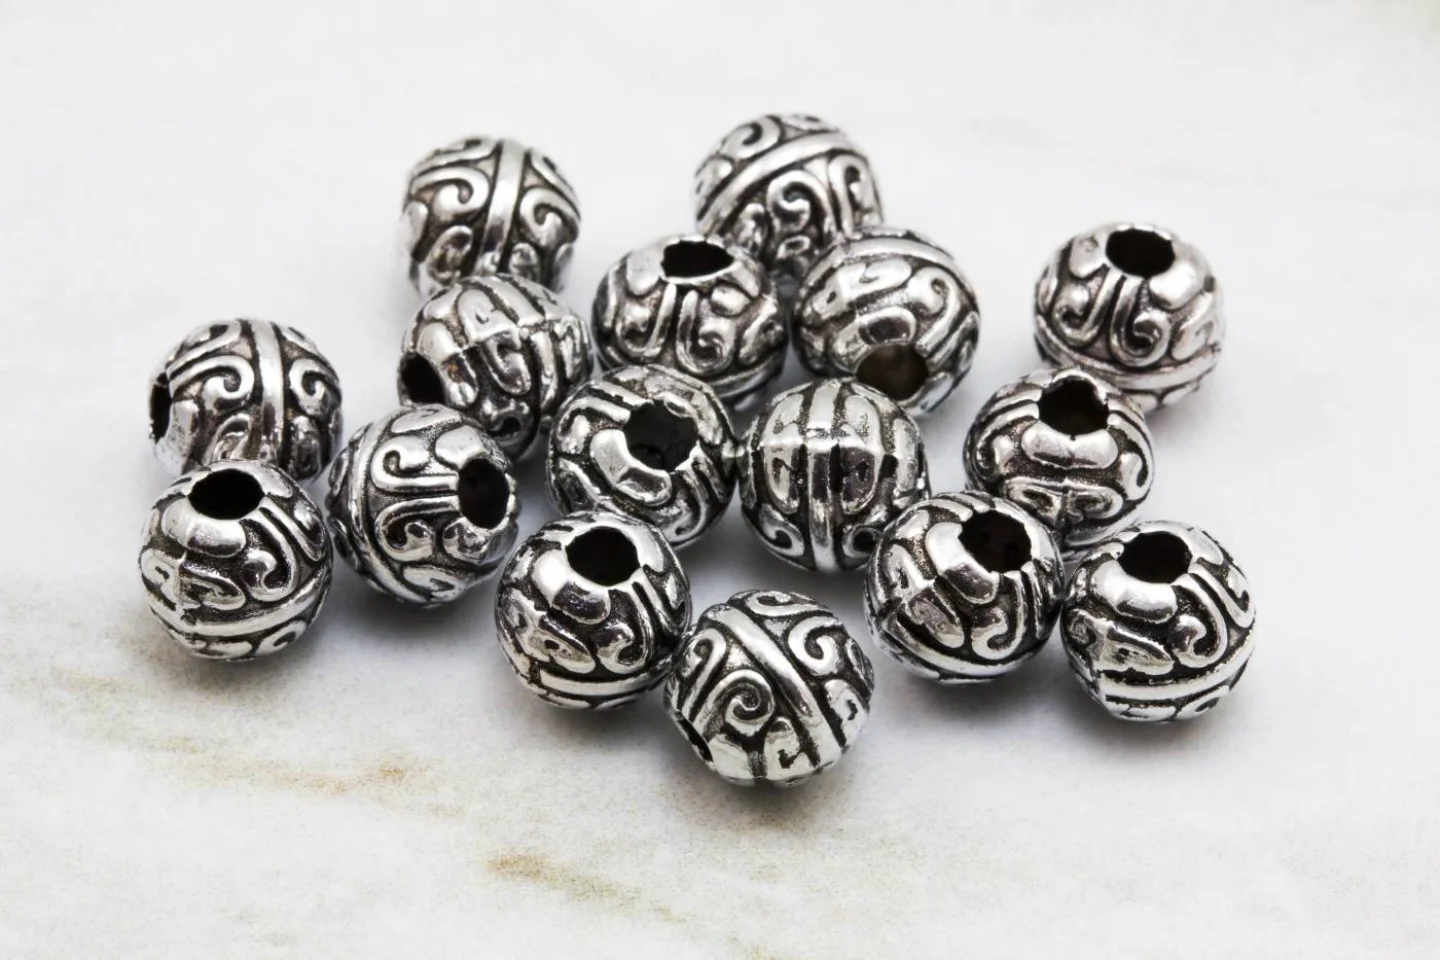 8mm-metal-round-ball-silver-beads.